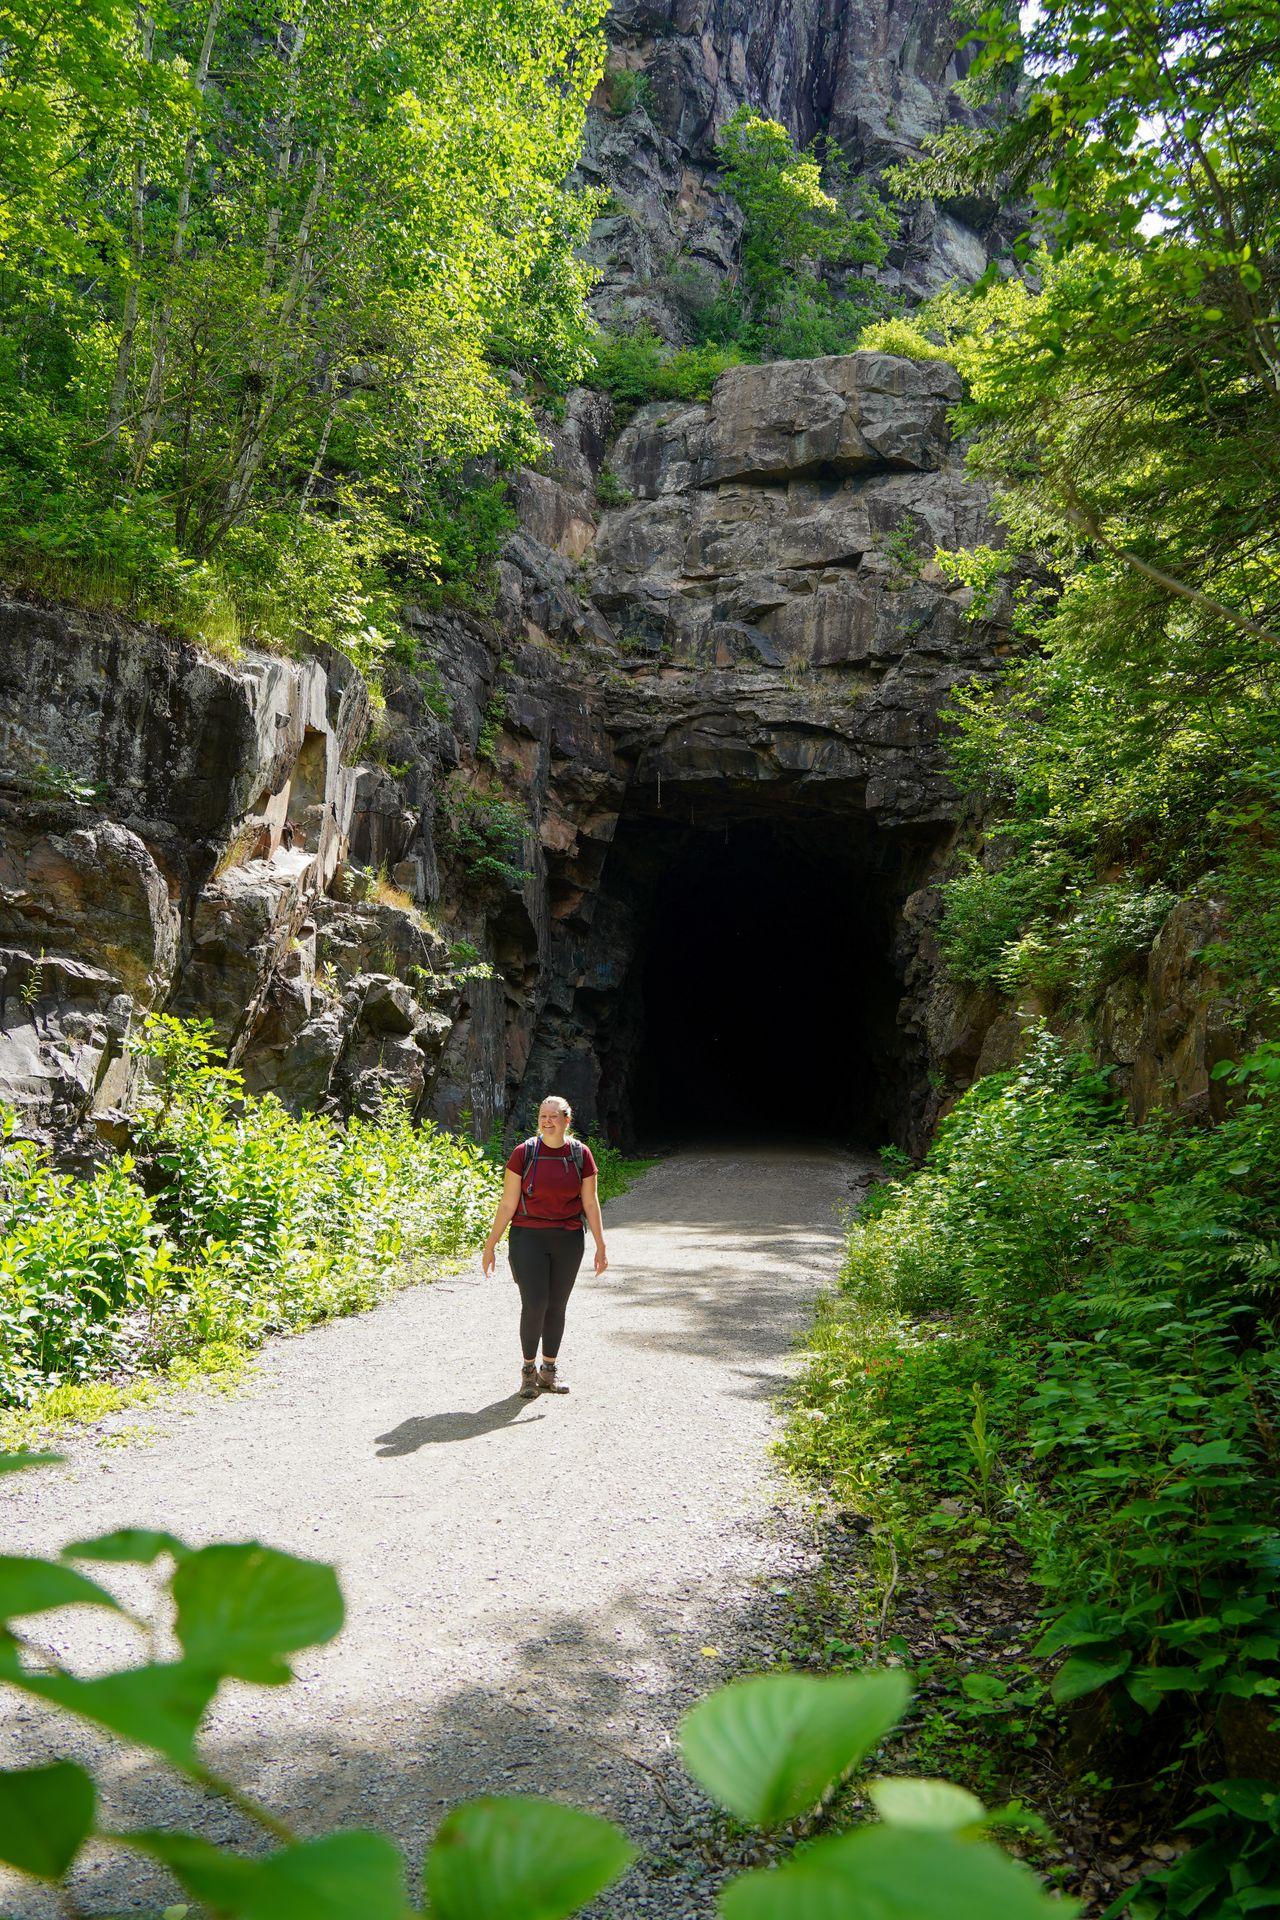 Lydia standing in front of the tall and square Railroad tunnel on the Ely's Peak trail.